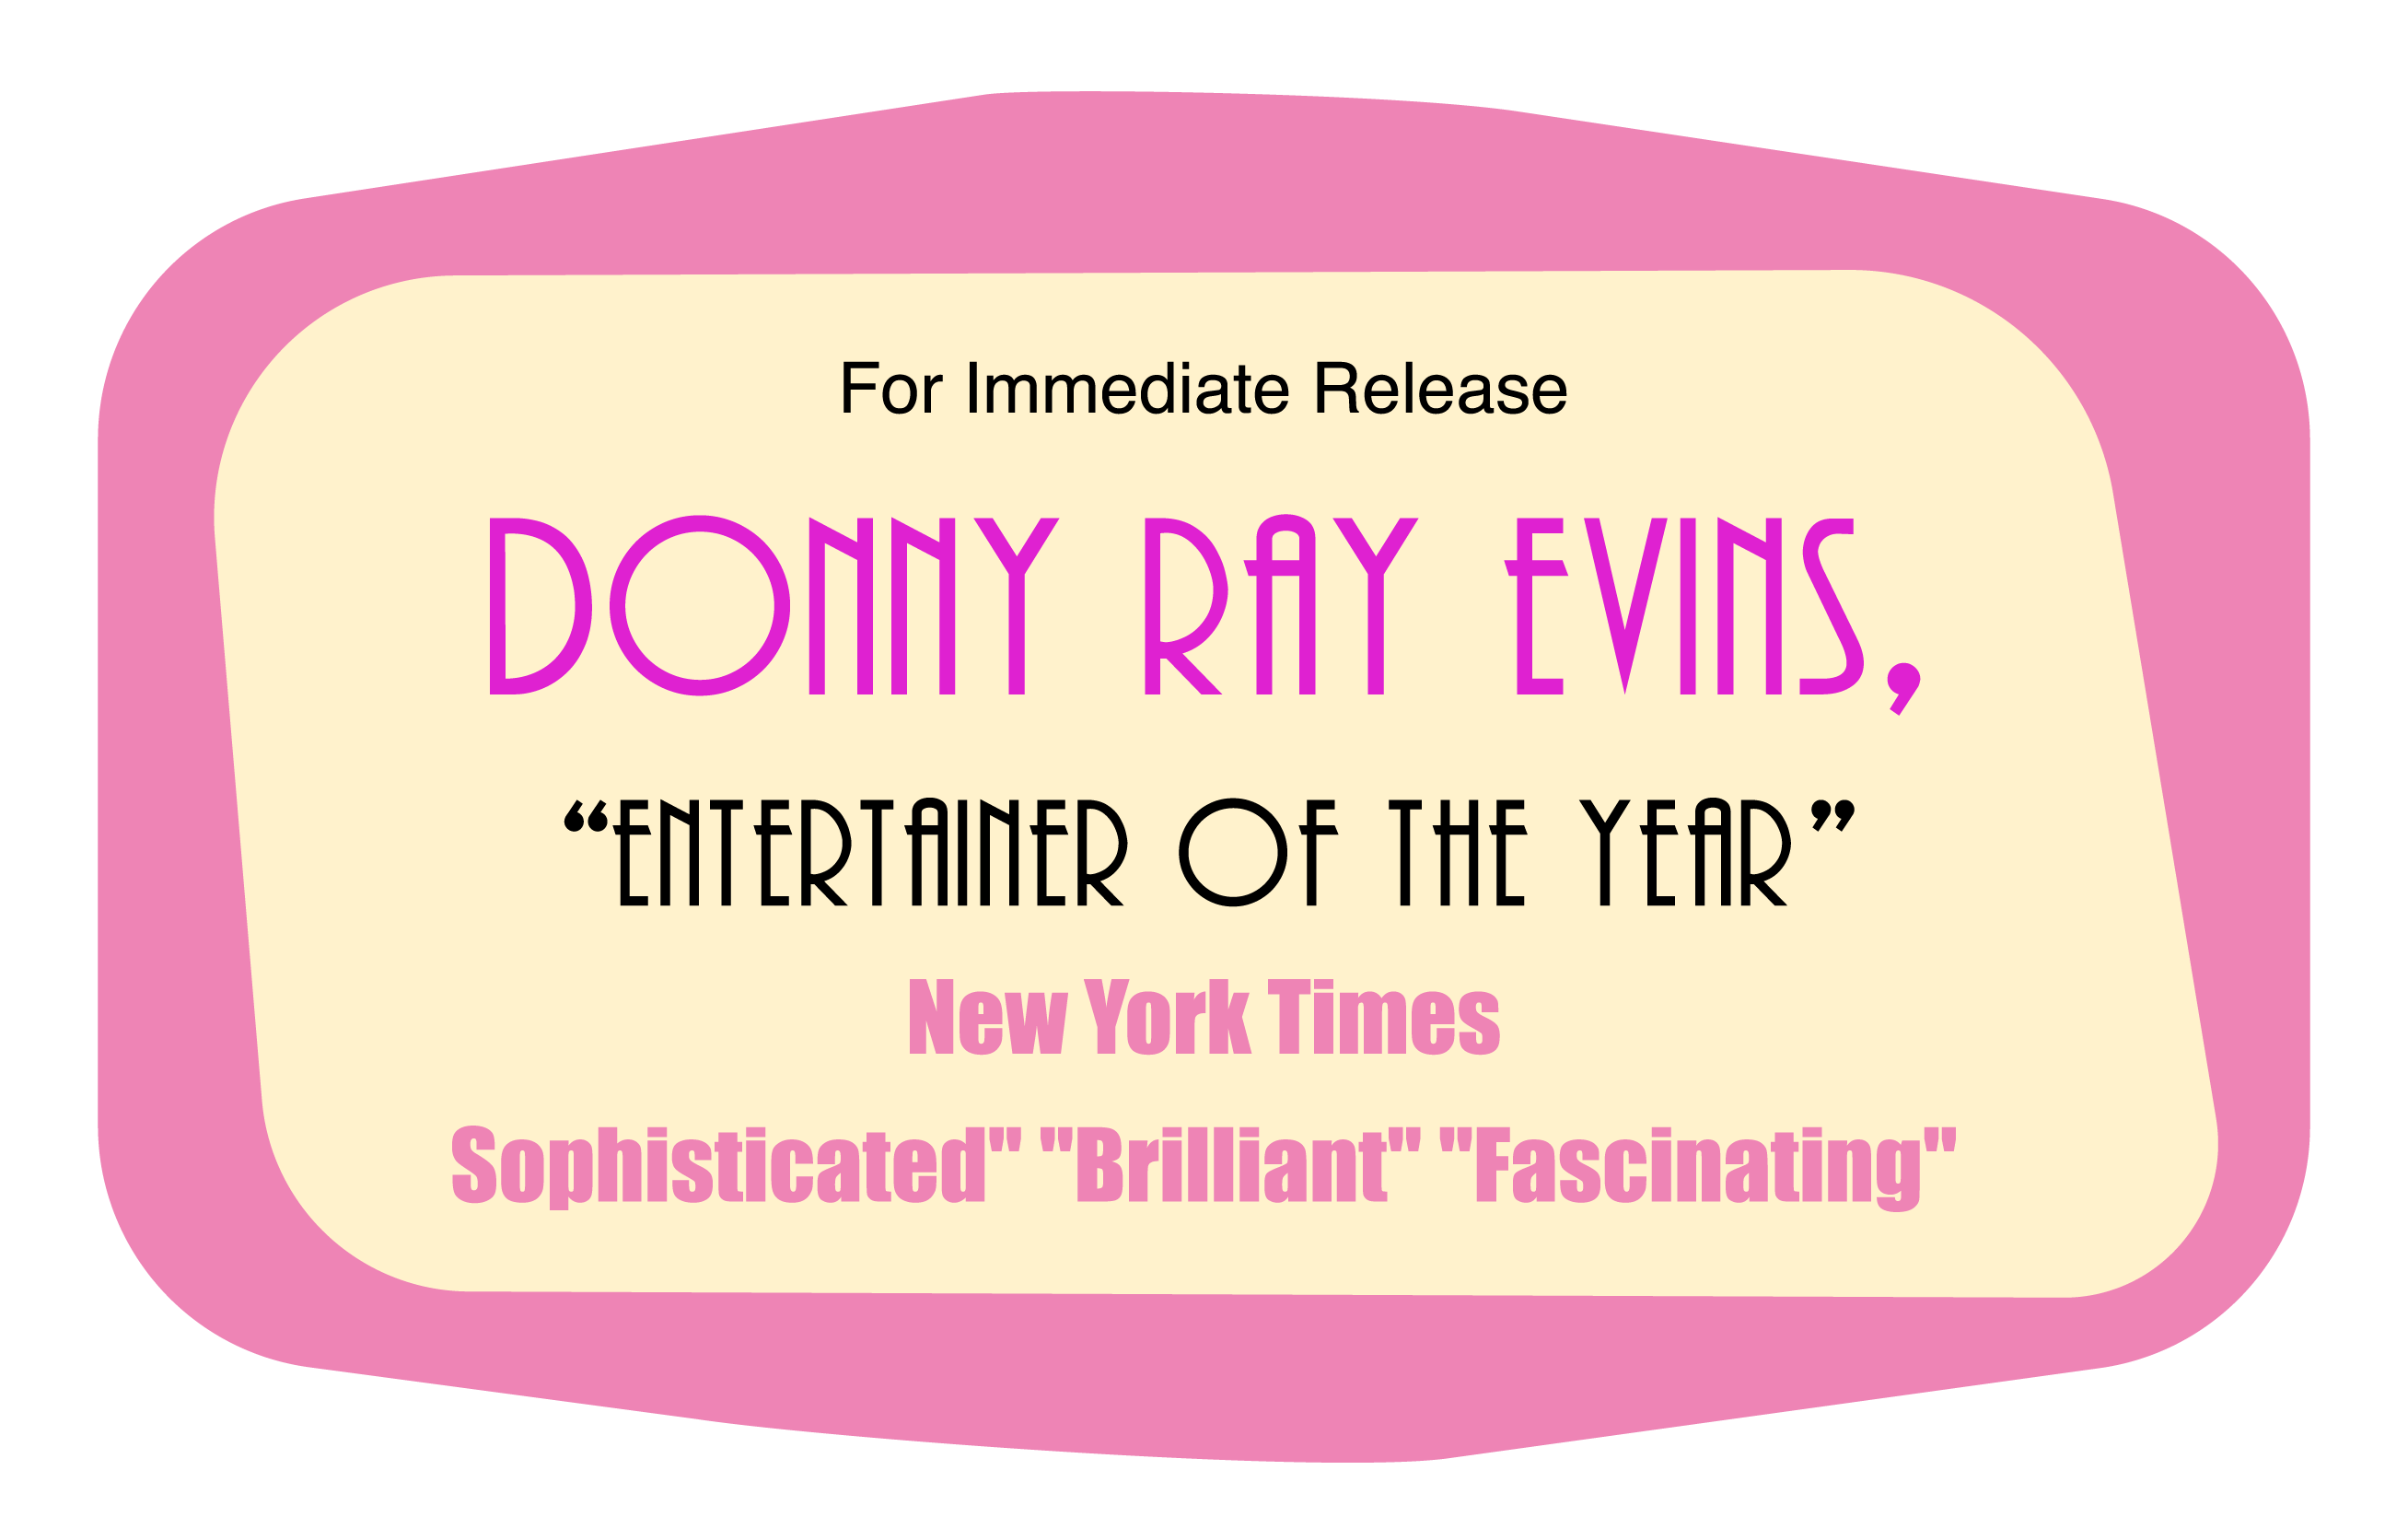 For Immediate Release Donny Ray Evins, Entertainer of the Year / New York Times Sophisticated/Brilliant/Fascinating